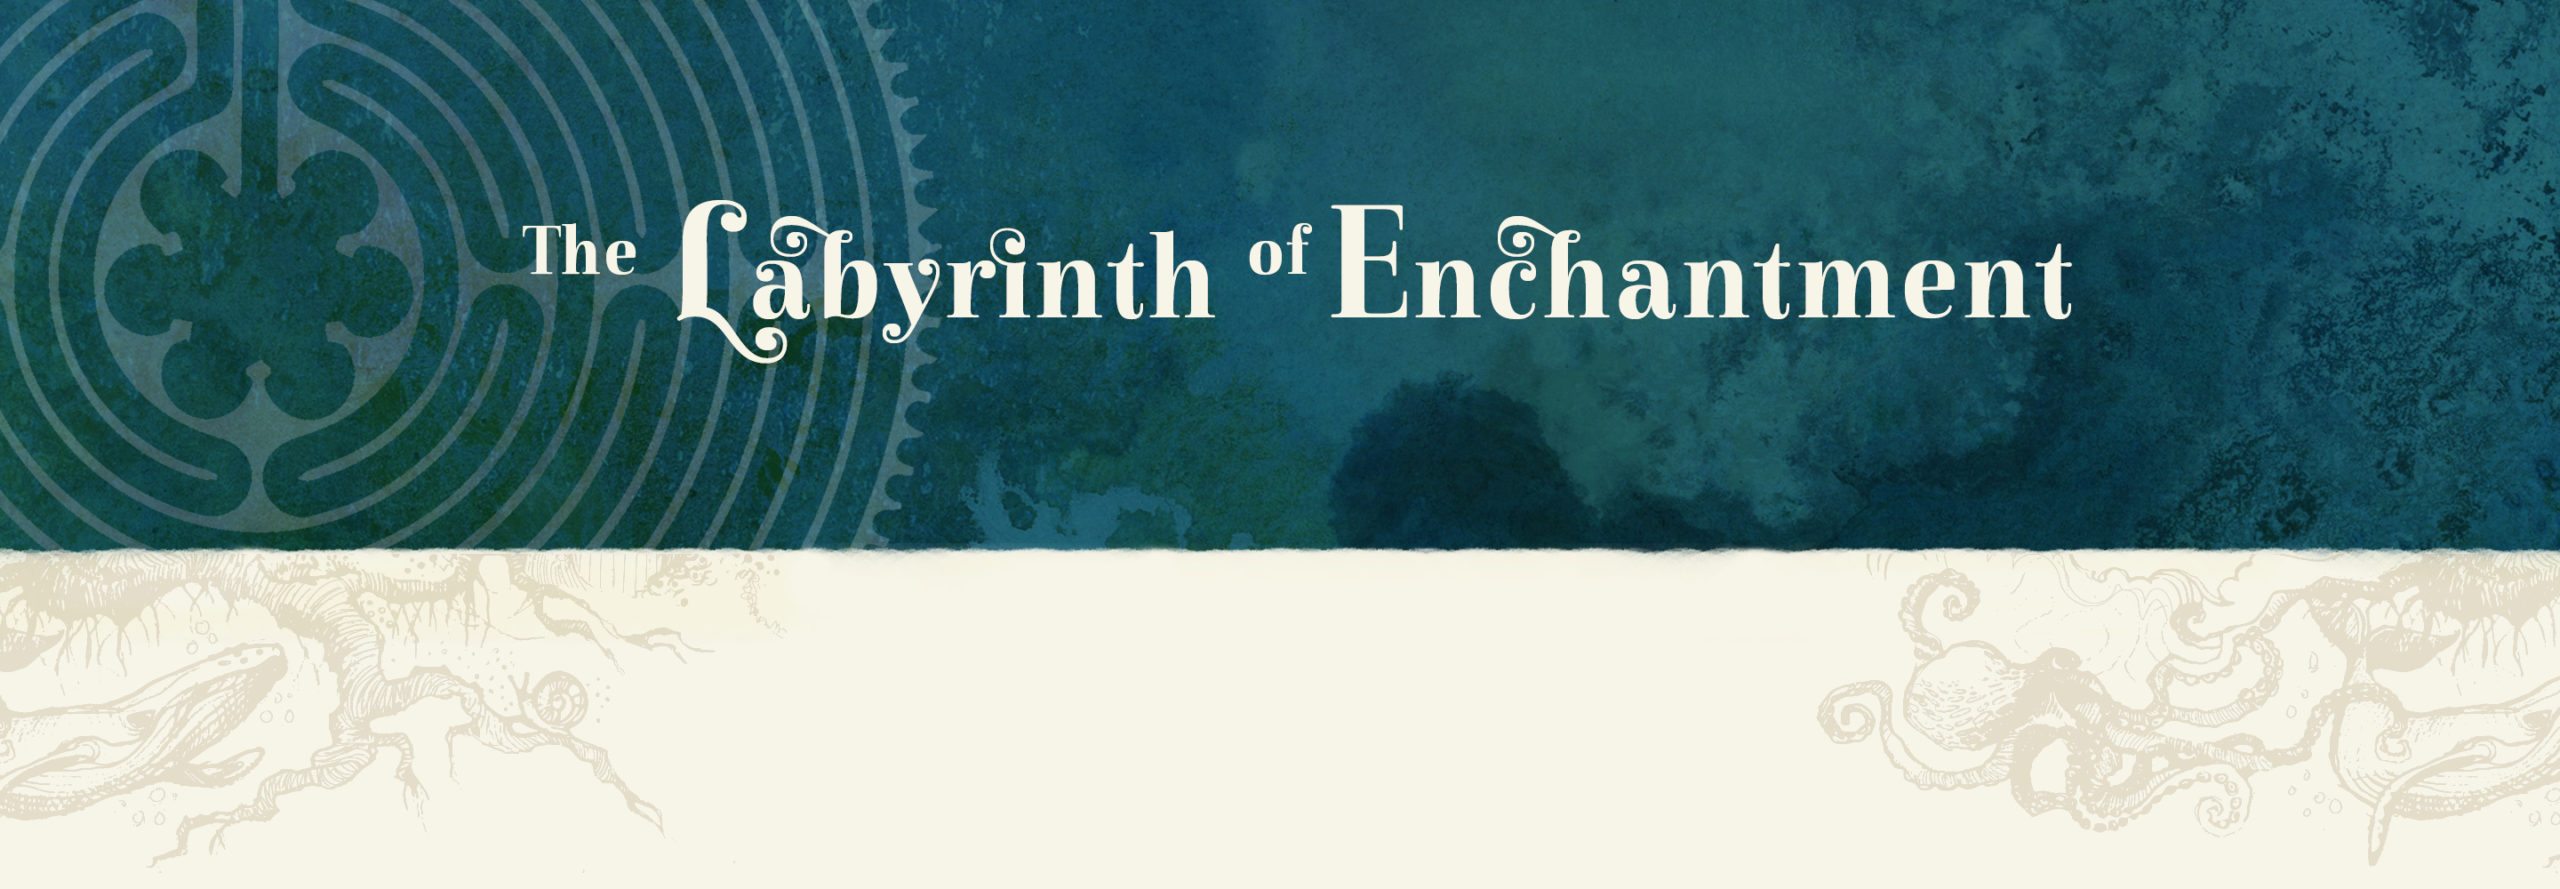 The Labyrinth of Enchantment